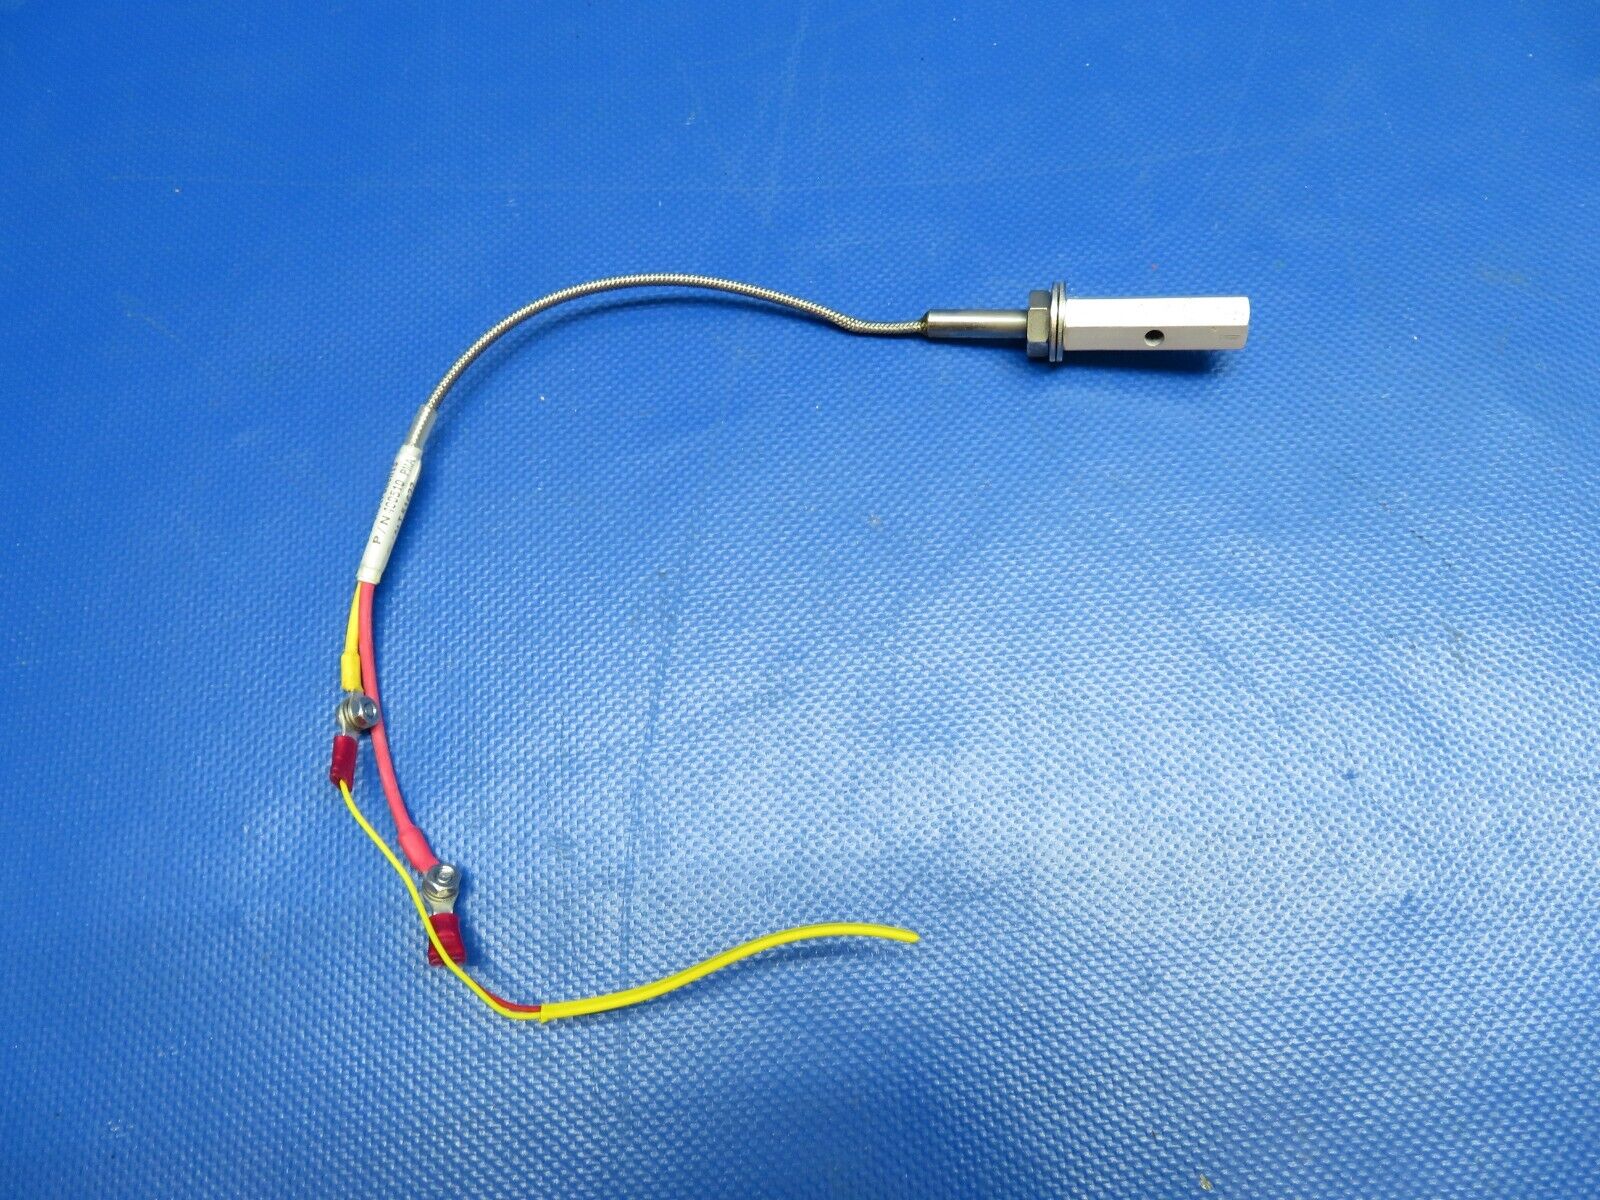 JP Instruments Outside Air Temperature Sensor P/N 400510 TESTED (0424-1744)